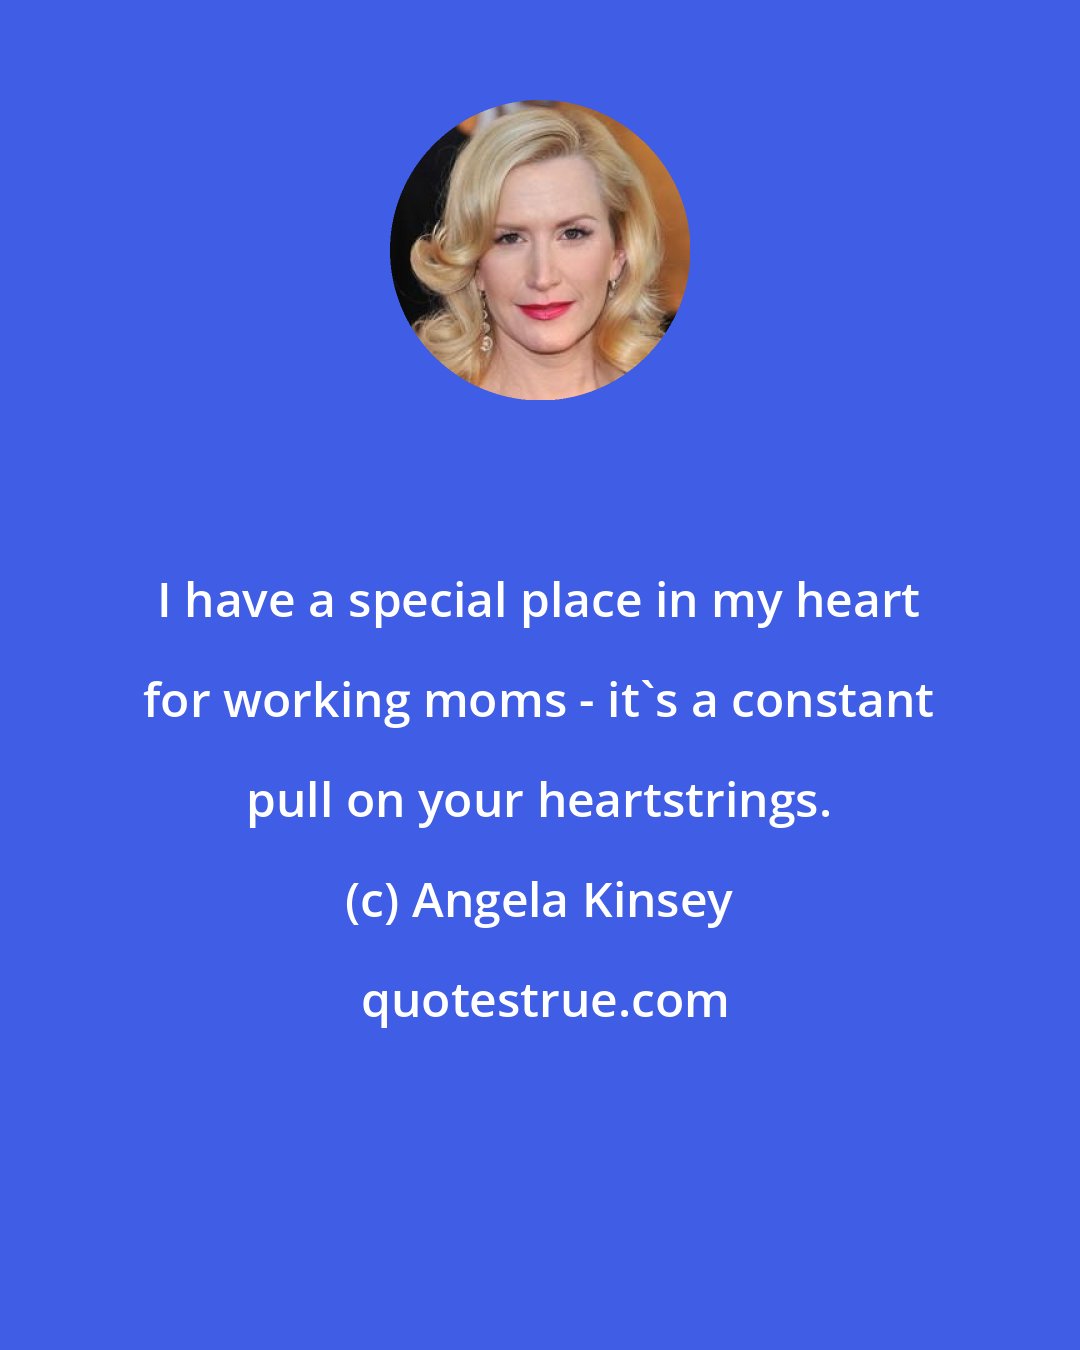 Angela Kinsey: I have a special place in my heart for working moms - it's a constant pull on your heartstrings.